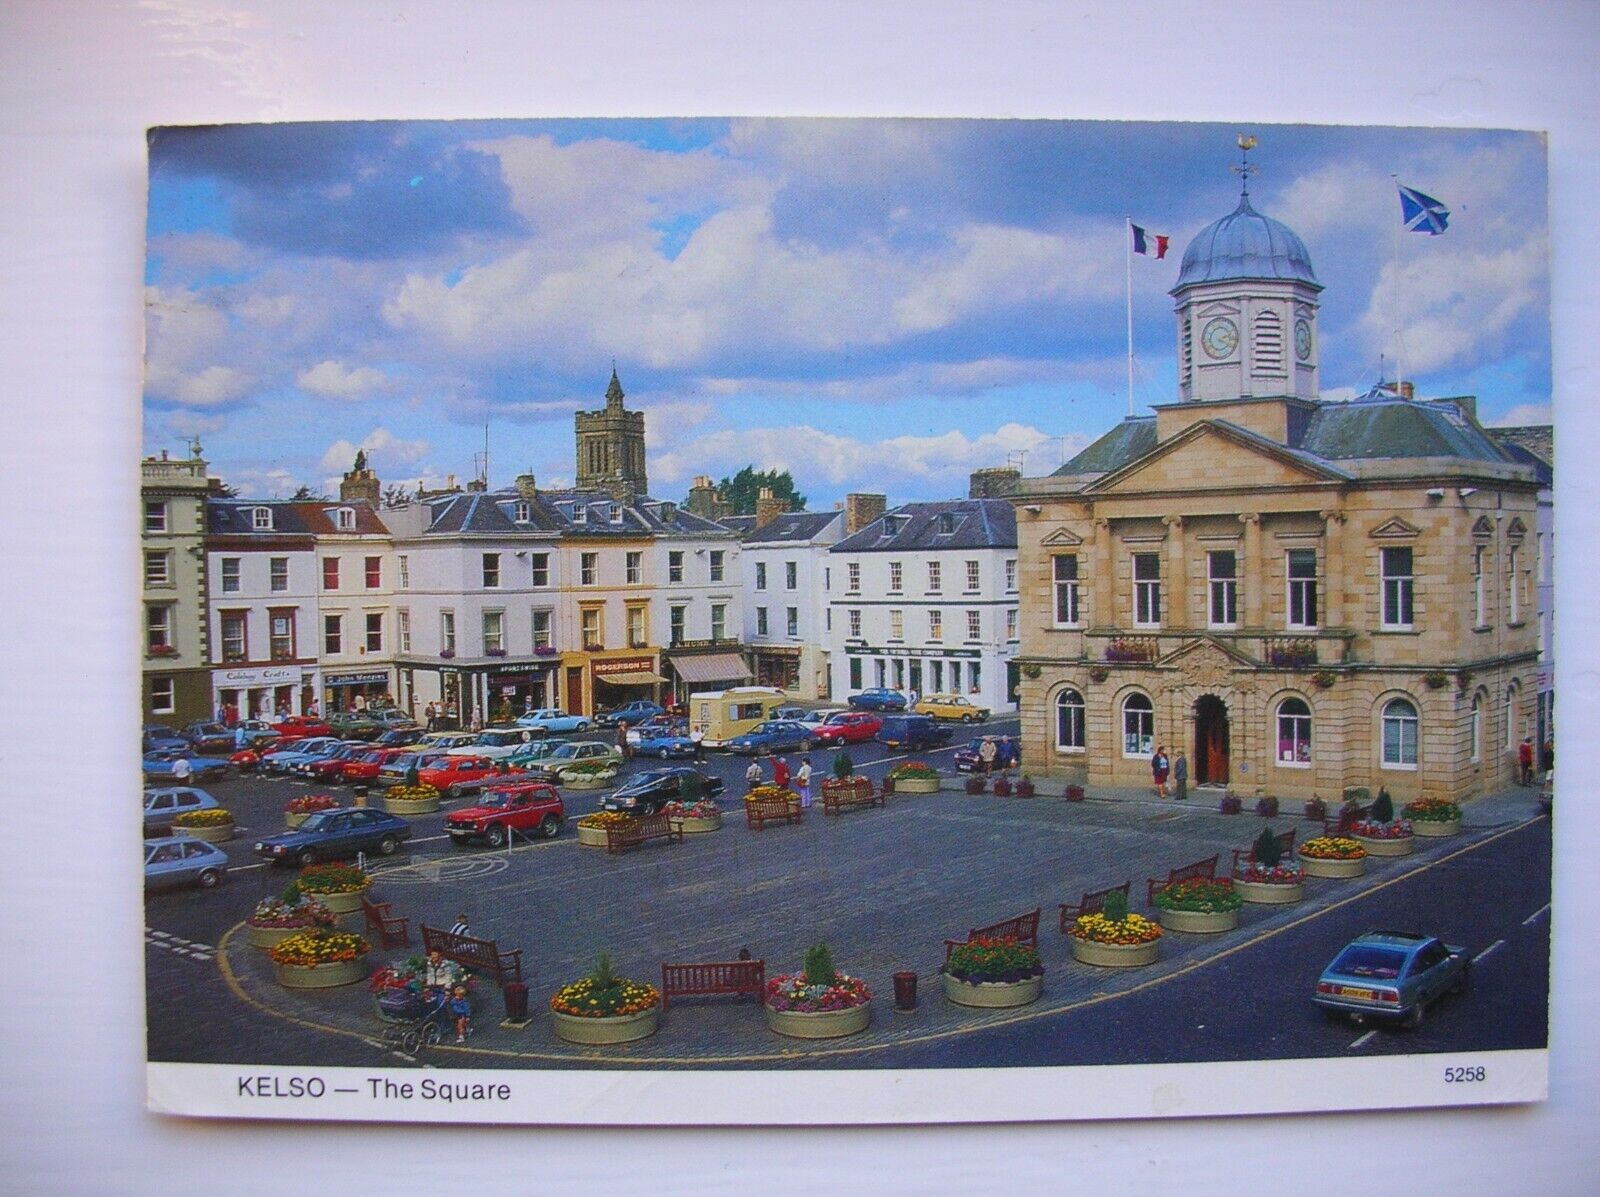 House Clearance - Kelso – The Square. Old cars, Camper van, Wedding car etc. Hail Caledonia – 1987